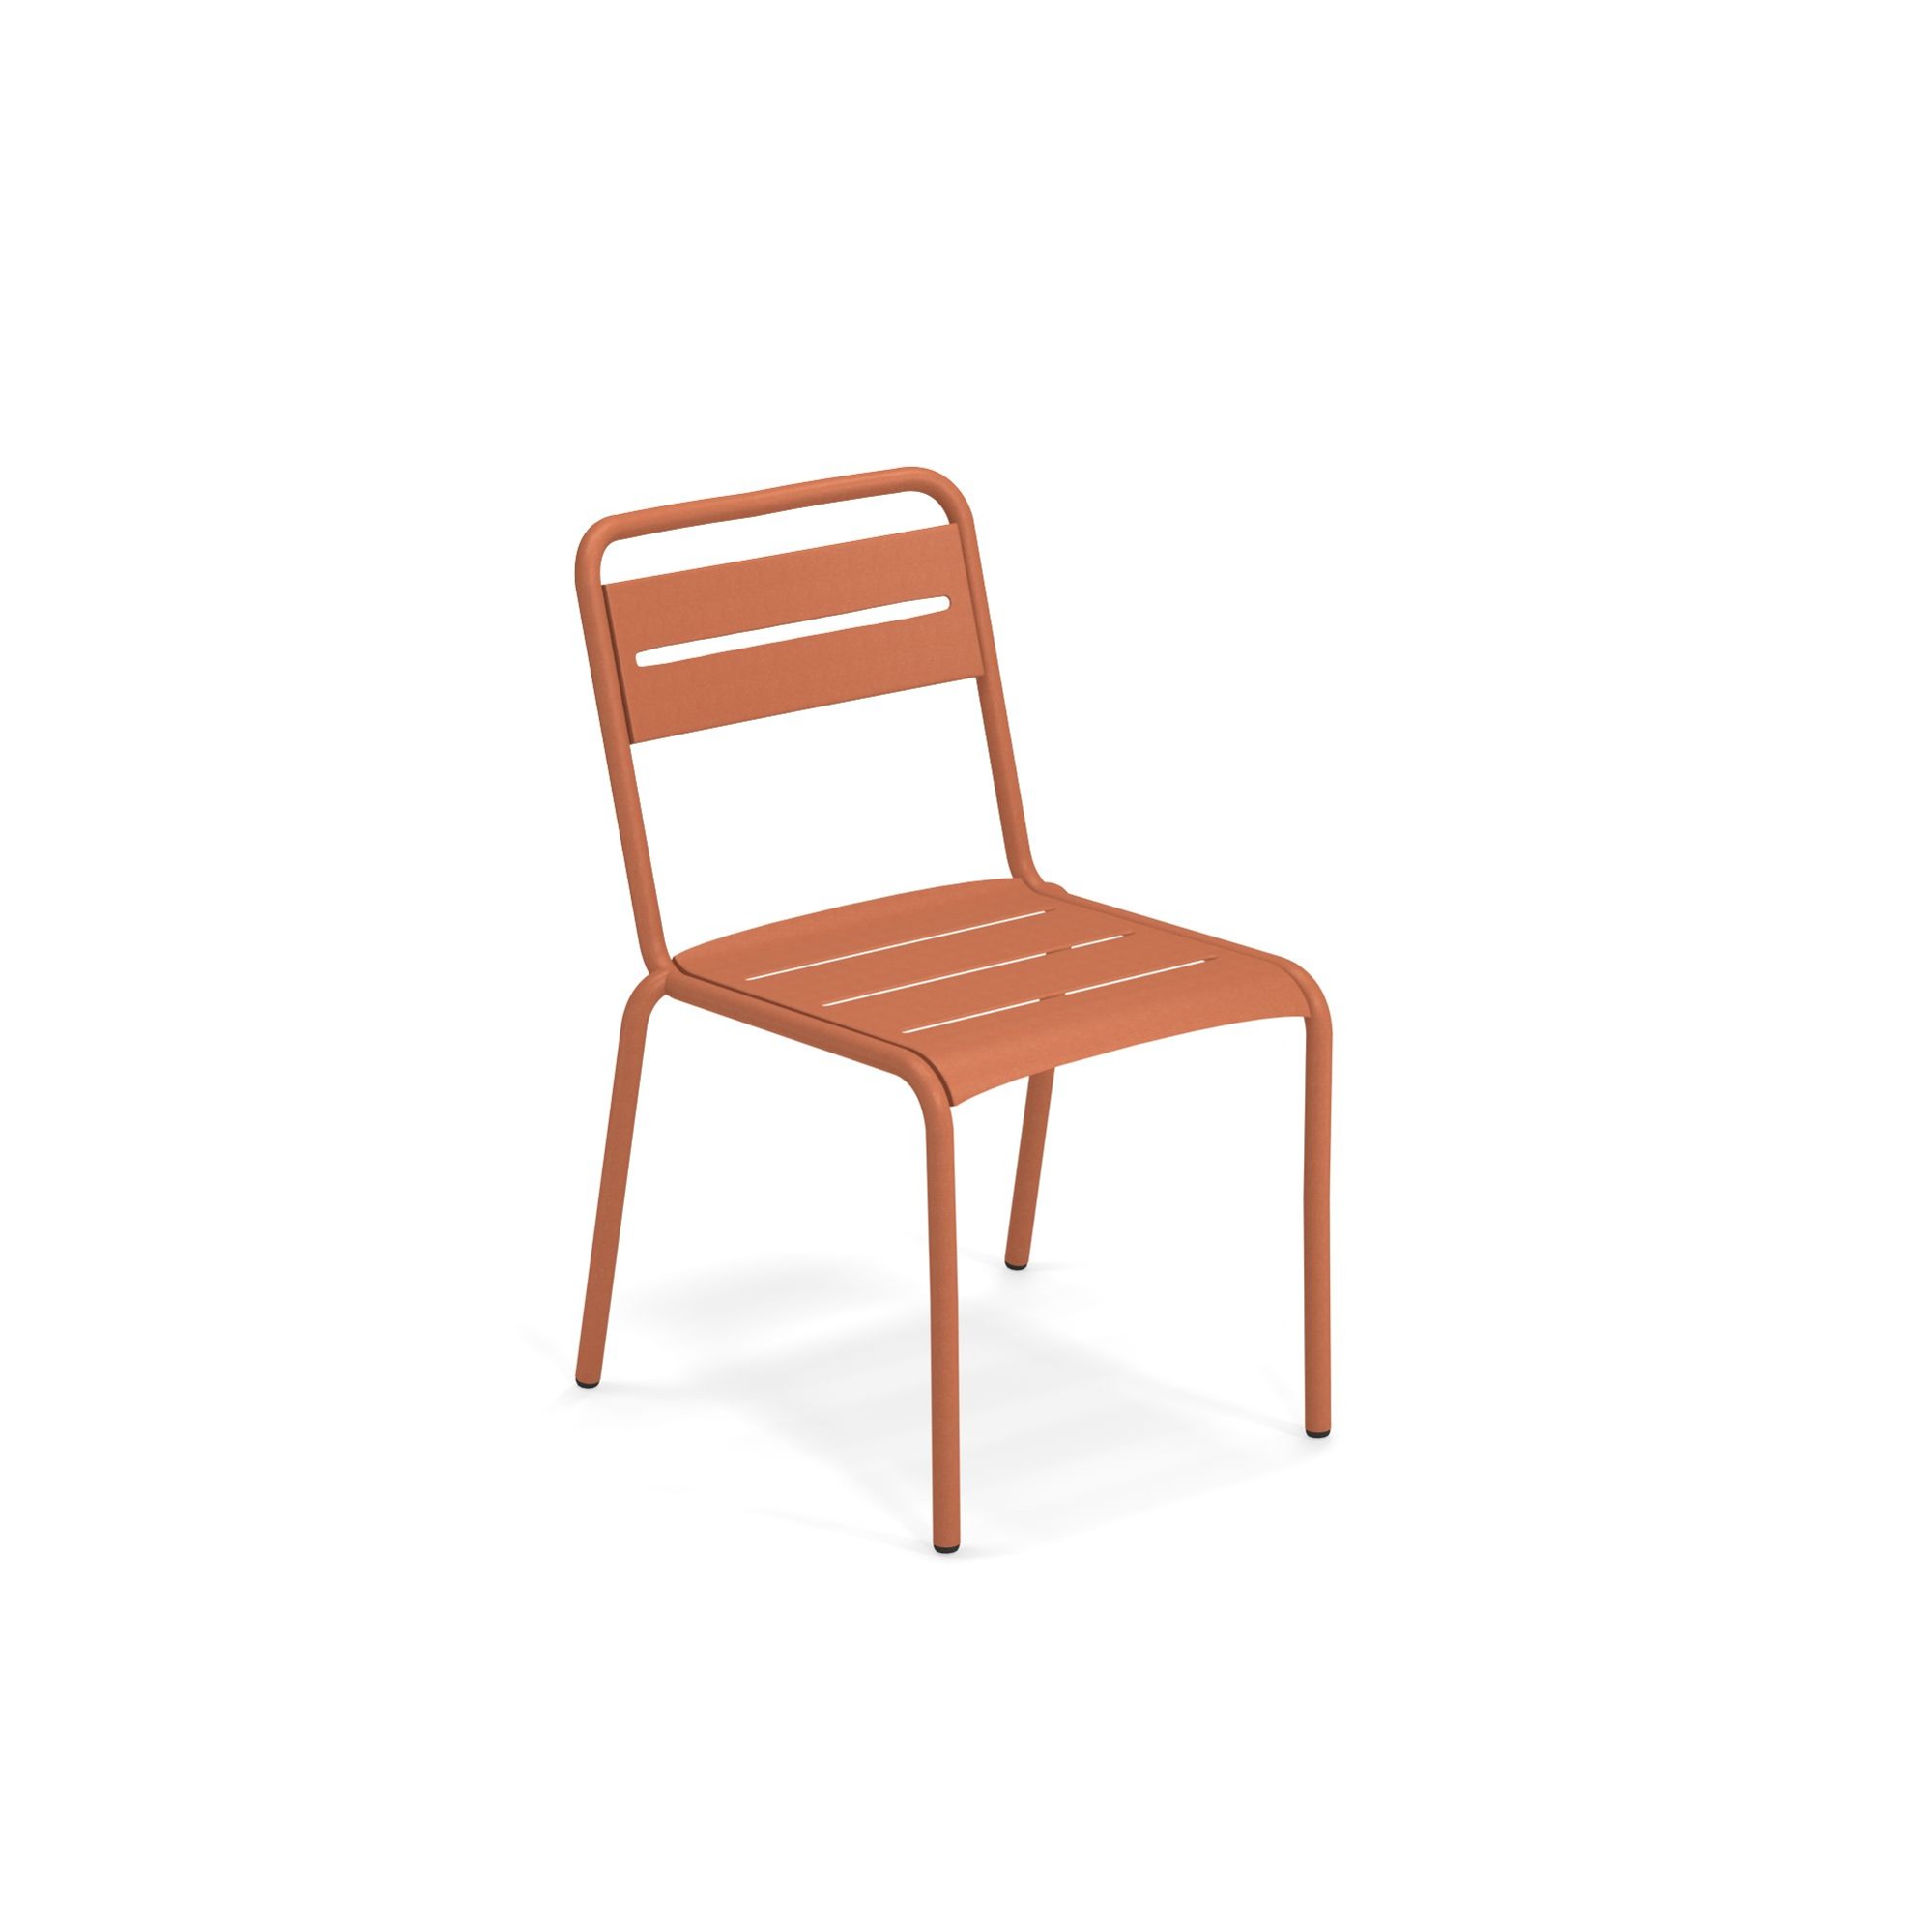 EMU STAR CHAIR - Maple Red